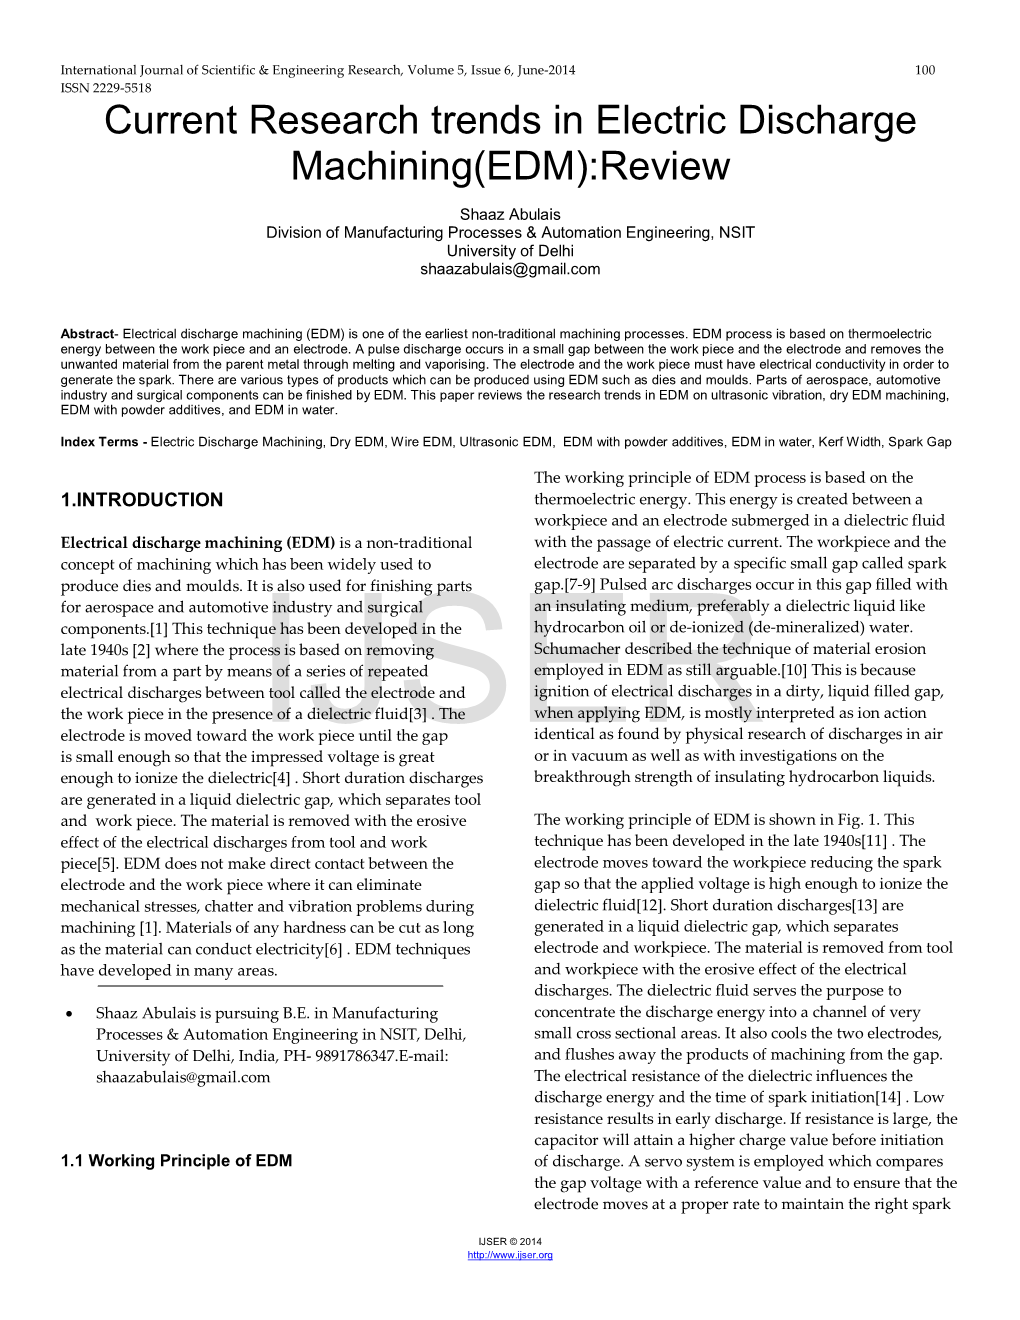 Current Research Trends in Electric Discharge Machining(EDM):Review